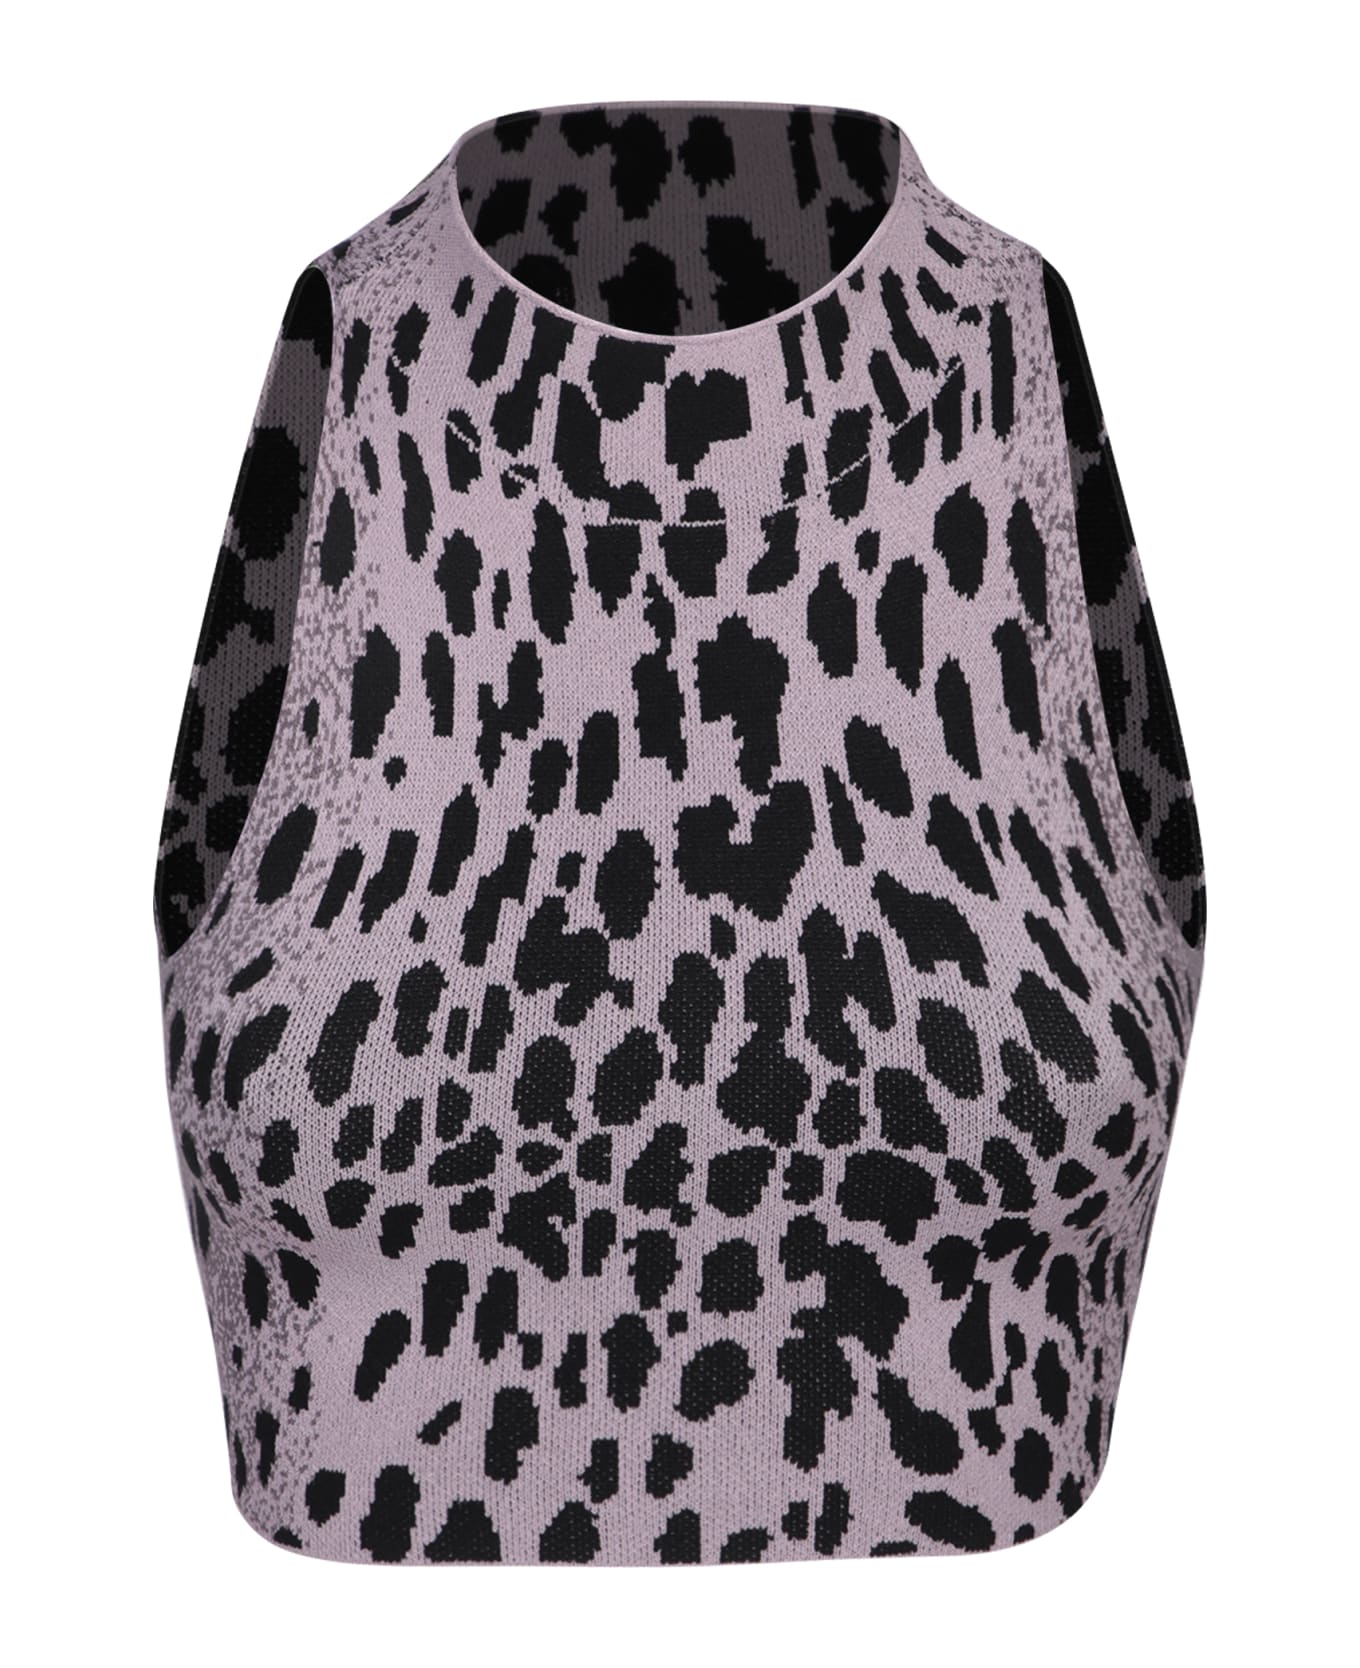 SSHEENA Leopard Knit Crop Top In Lilac And Black By Ssheena - Multi